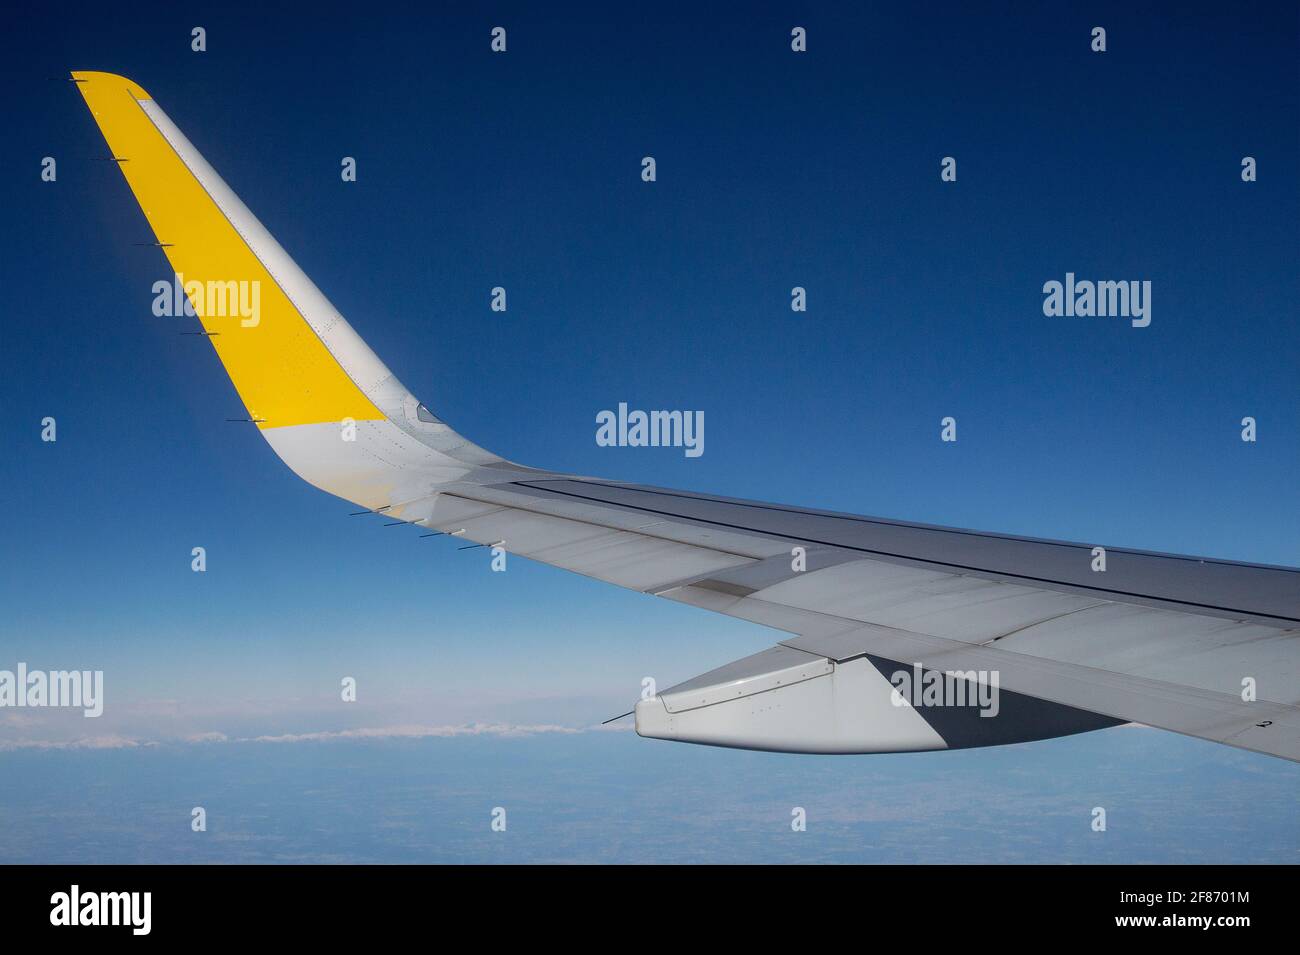 Plane with yellow marking in blue sky Stock Photo